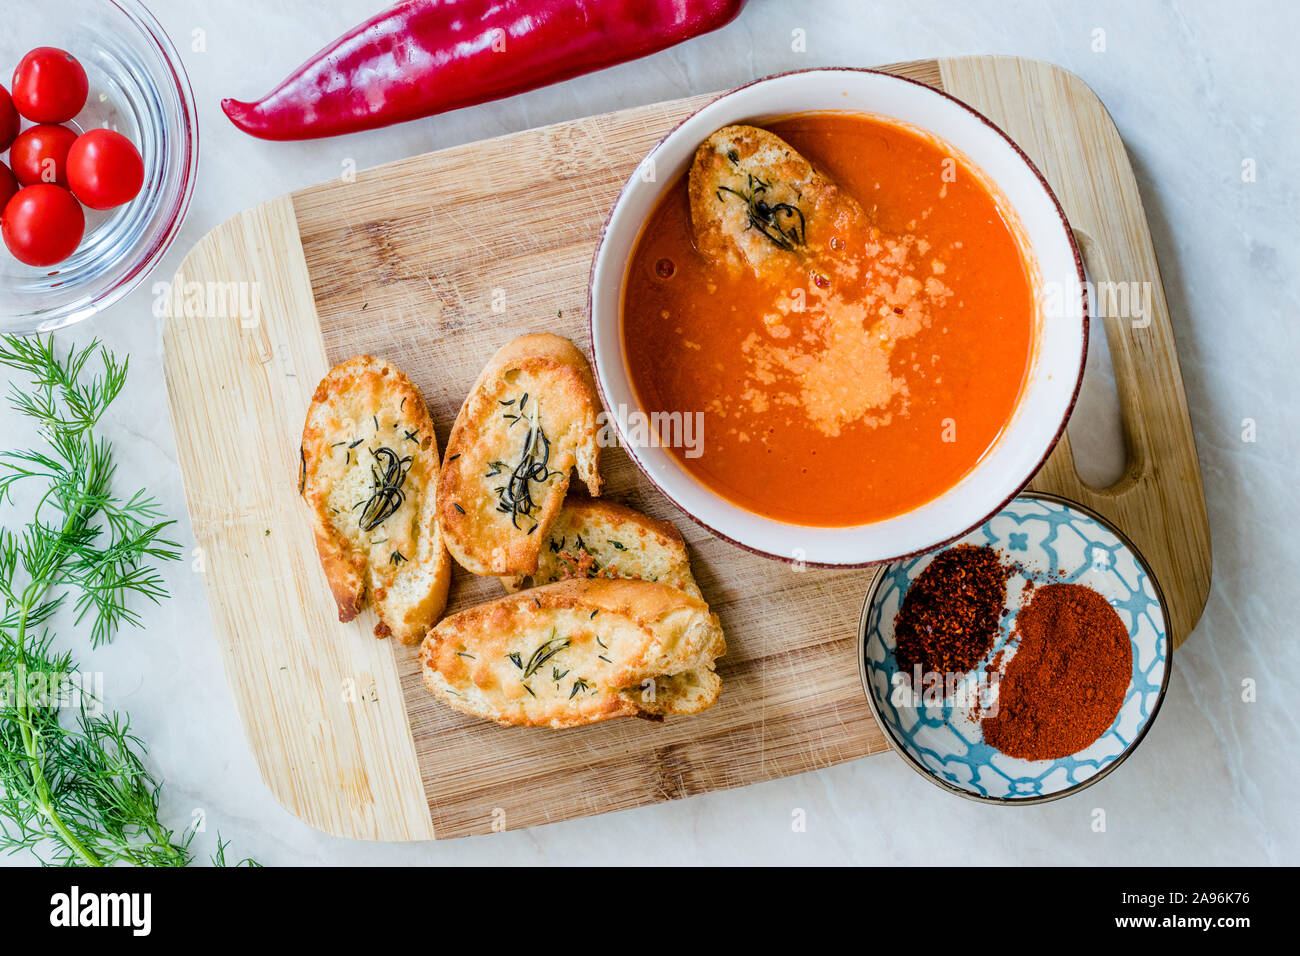 https://c8.alamy.com/comp/2A96K76/tomato-soup-with-parmesan-cheese-bread-in-natural-light-and-sunlight-homemade-organic-food-2A96K76.jpg